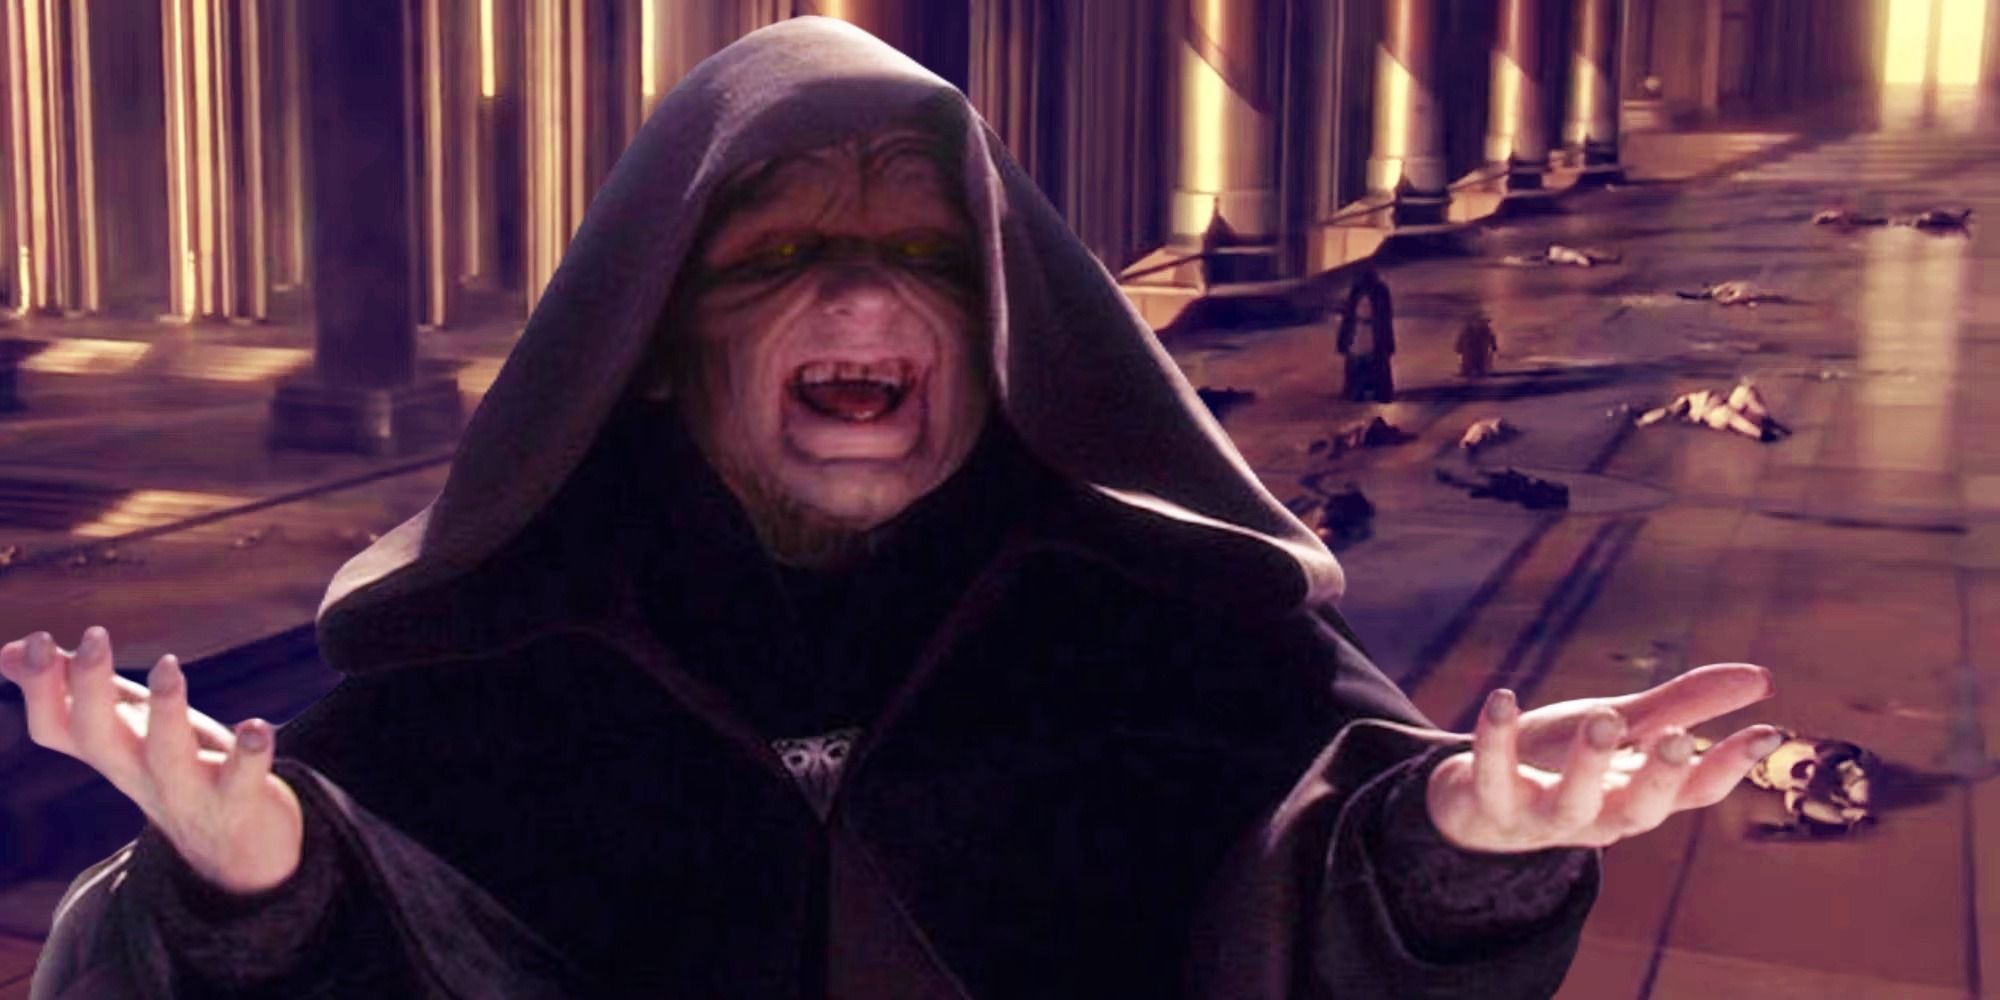 Palpatine cackling from Revenge of the Sith in the foreground with bodies lying in the Temple after Order 66 in the background